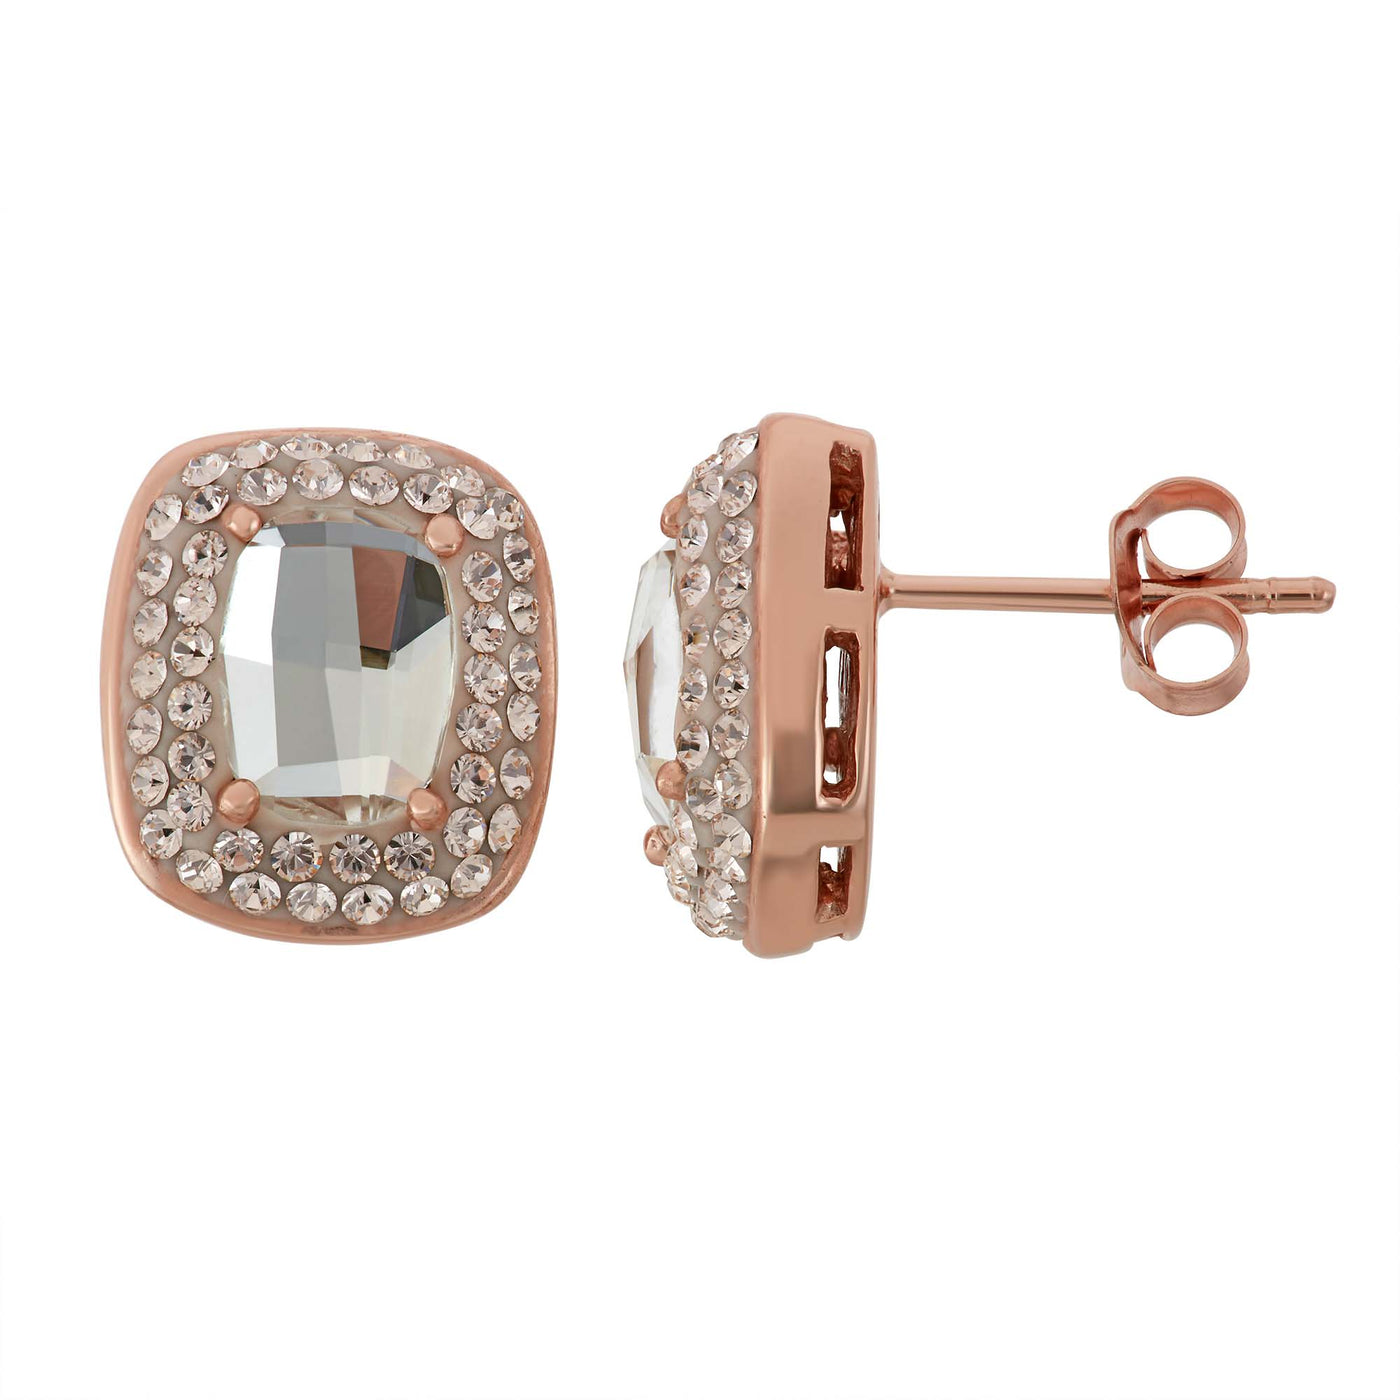 Rebecca Sloane Rose Gold Silver Square Earring With Crystal